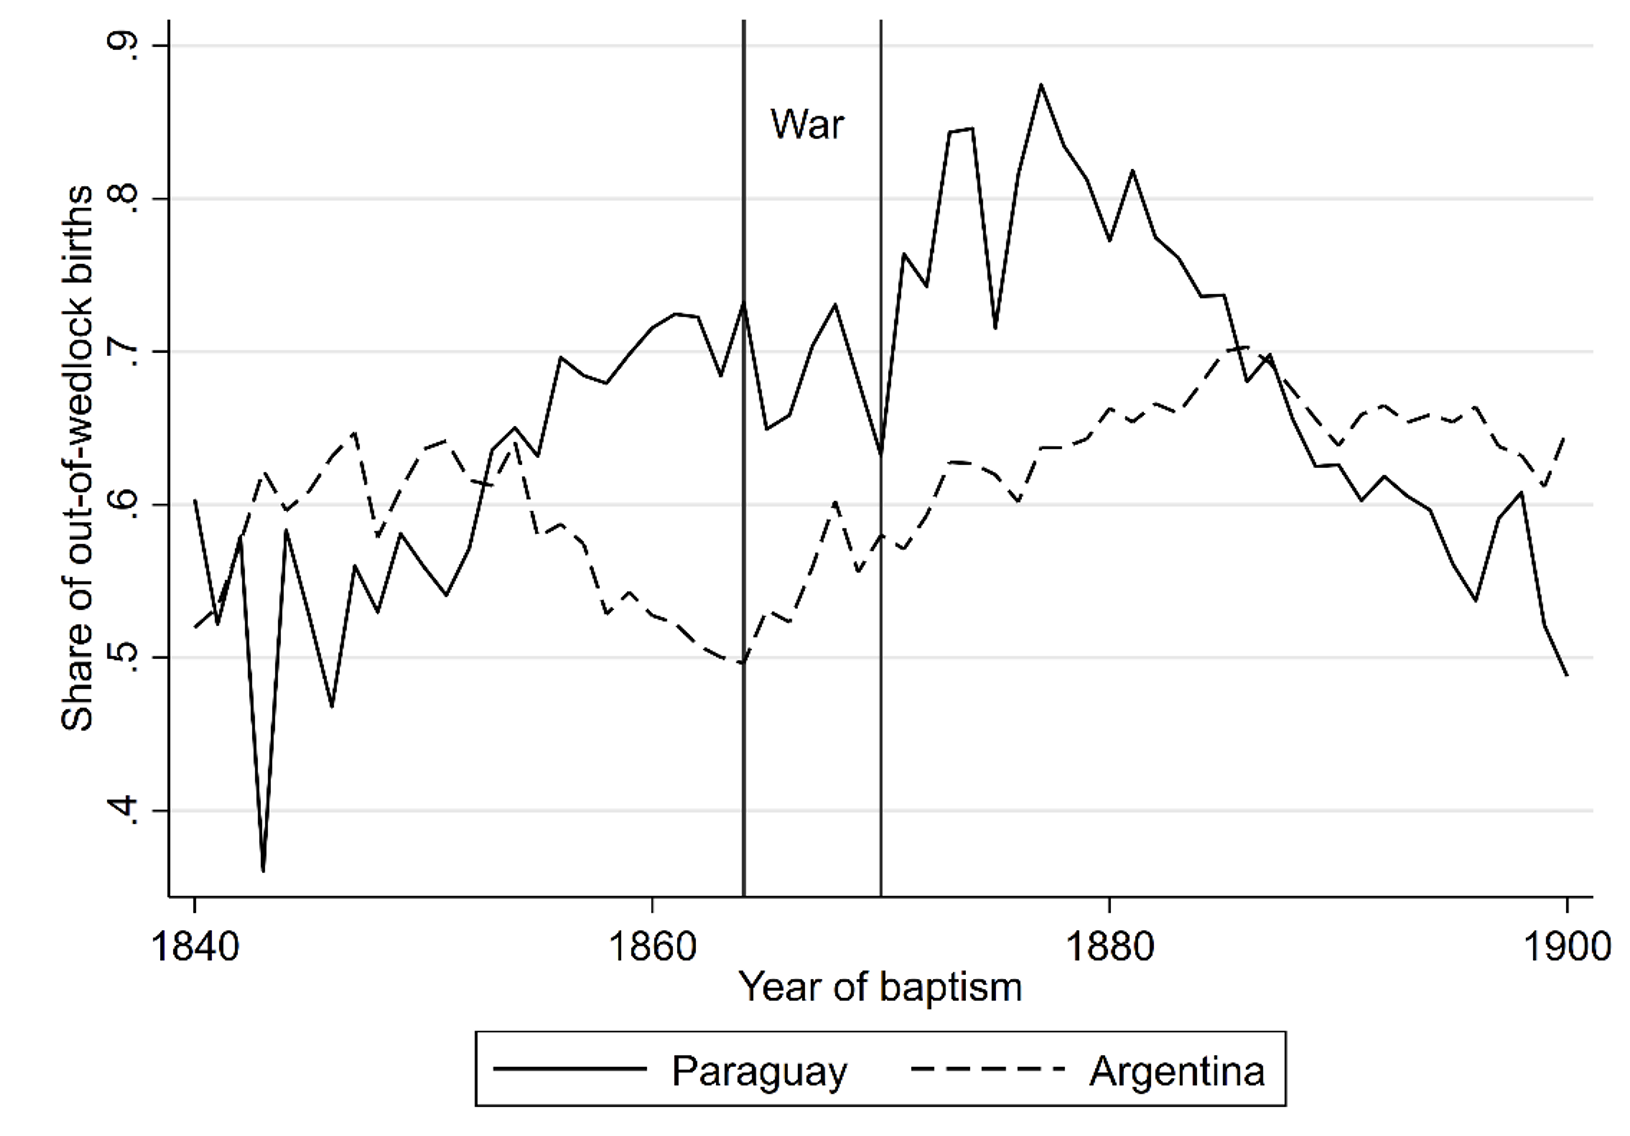 Figure 4 Out-of-wedlock birth rates across Paraguay and Argentina